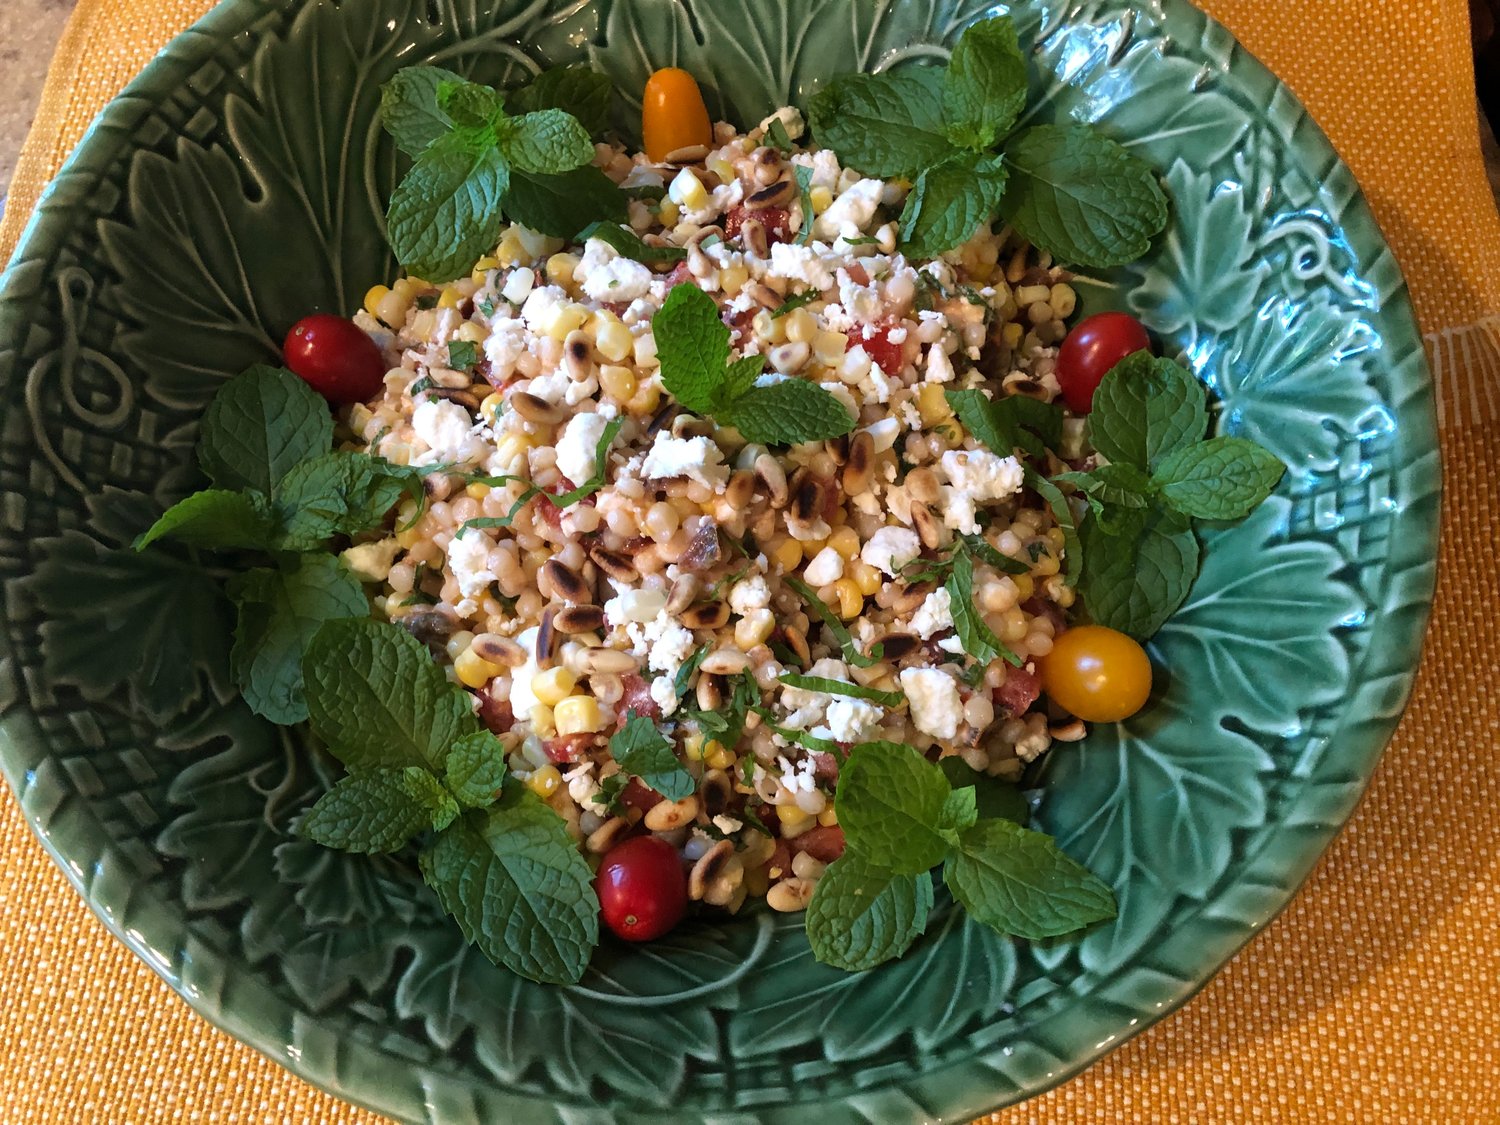 This Raw Corn, Tomato and Pearl Coucous Salad is simply dressed with good extra-virgin olive oil, lemon juice, salt and pepper.